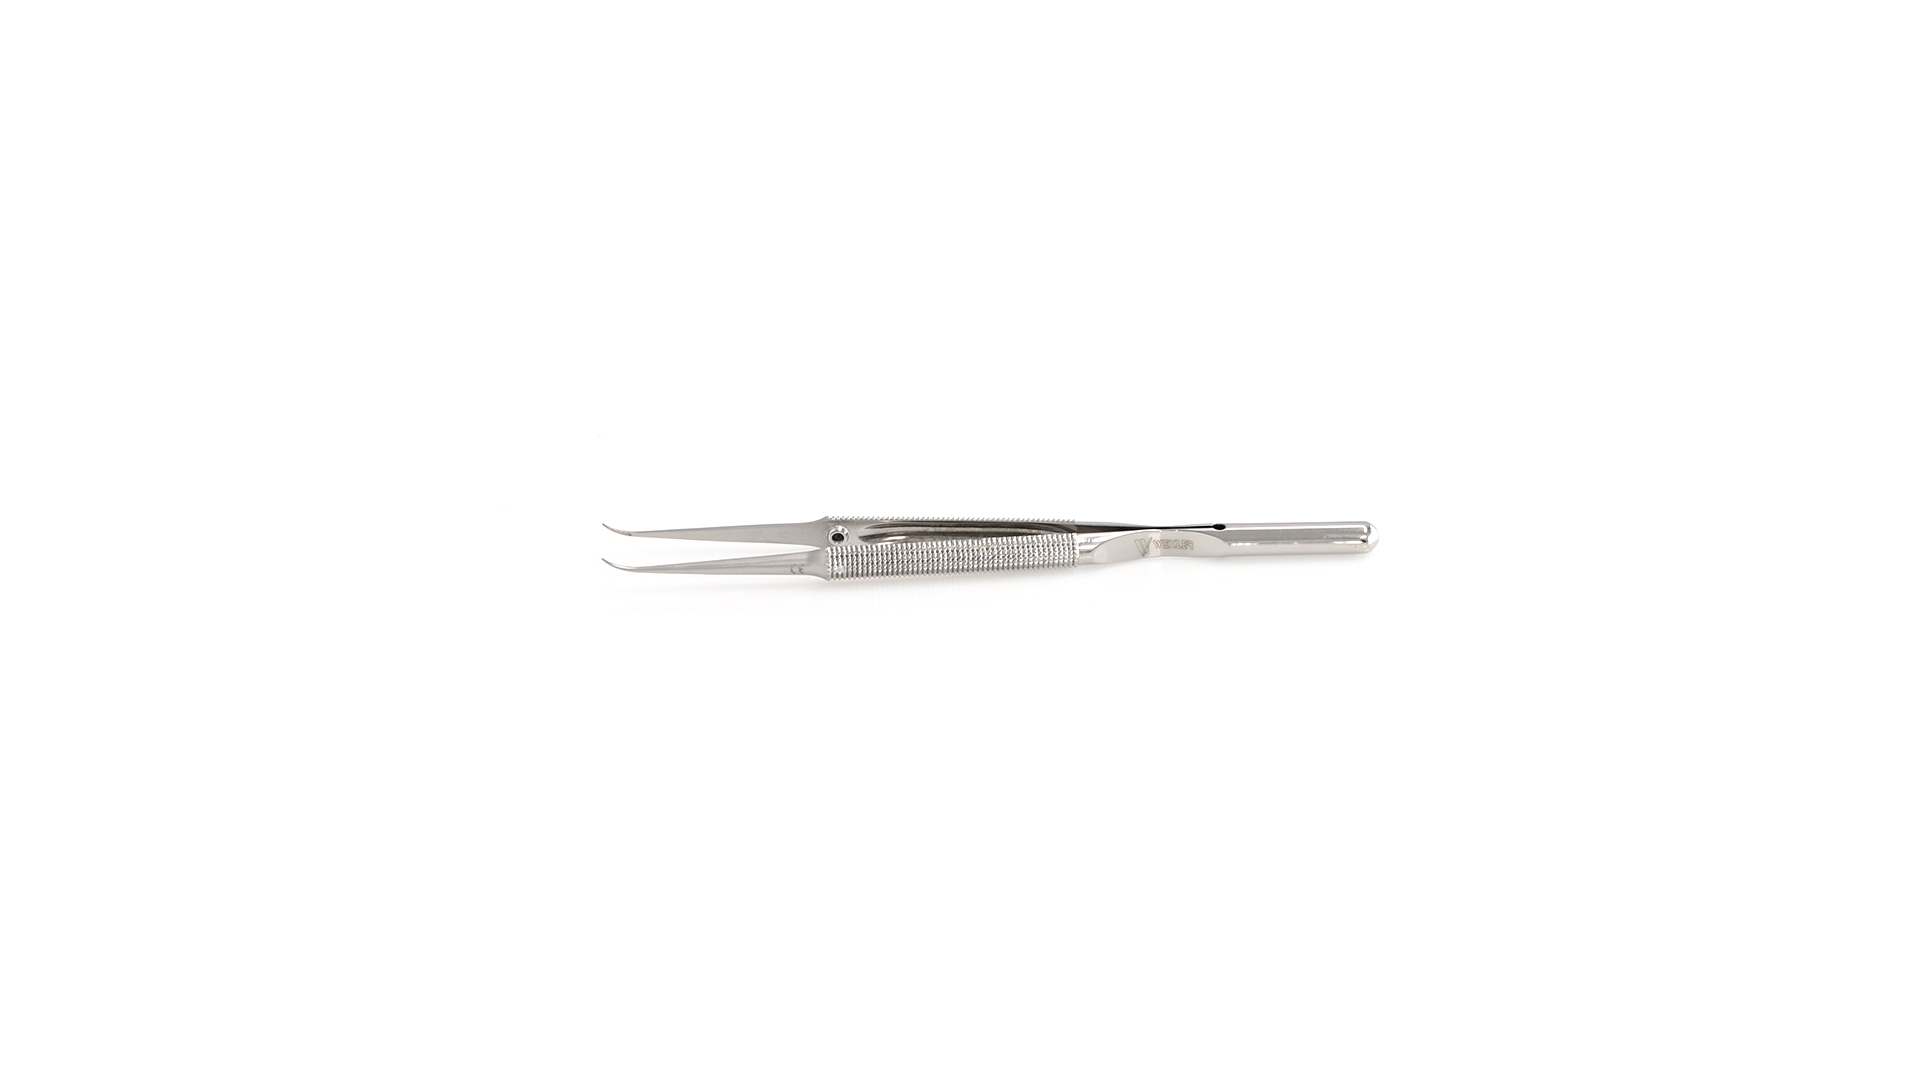 Micro Forceps - Curved 0.4mm tips w/TC coated tying platform